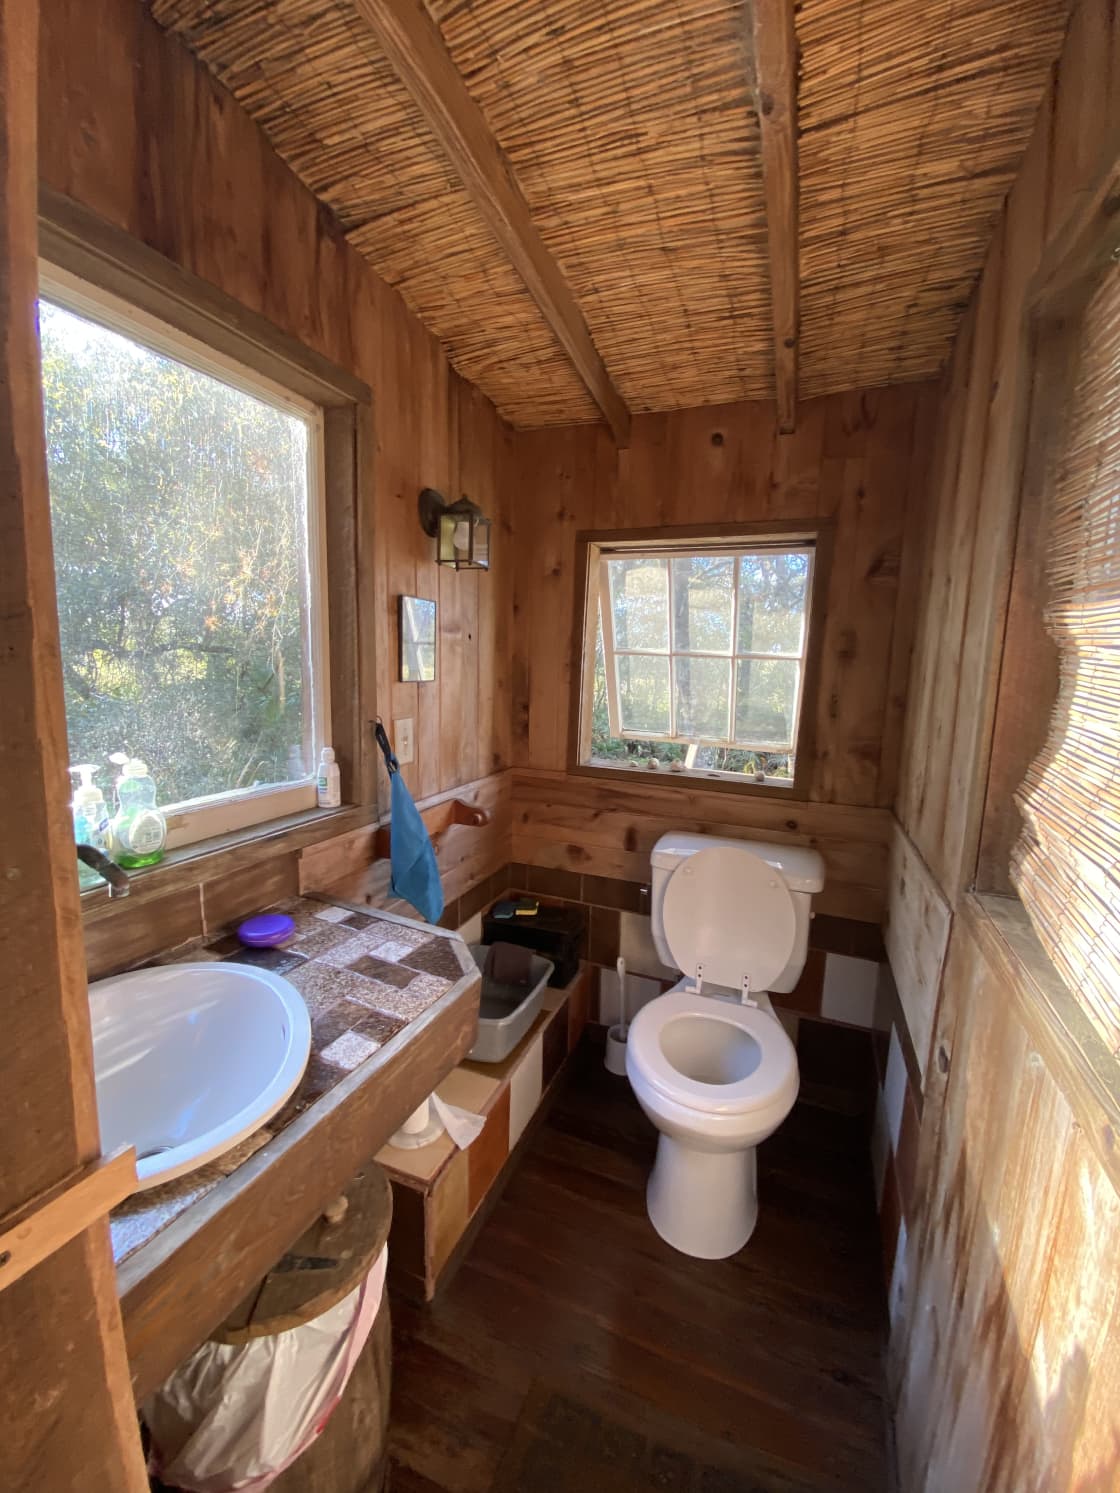 There is not sink in the cabin itself, so you’ll use this bathroom sink for dishes and such (bathroom is detached from the cabin itself, but is just right there on the porch)